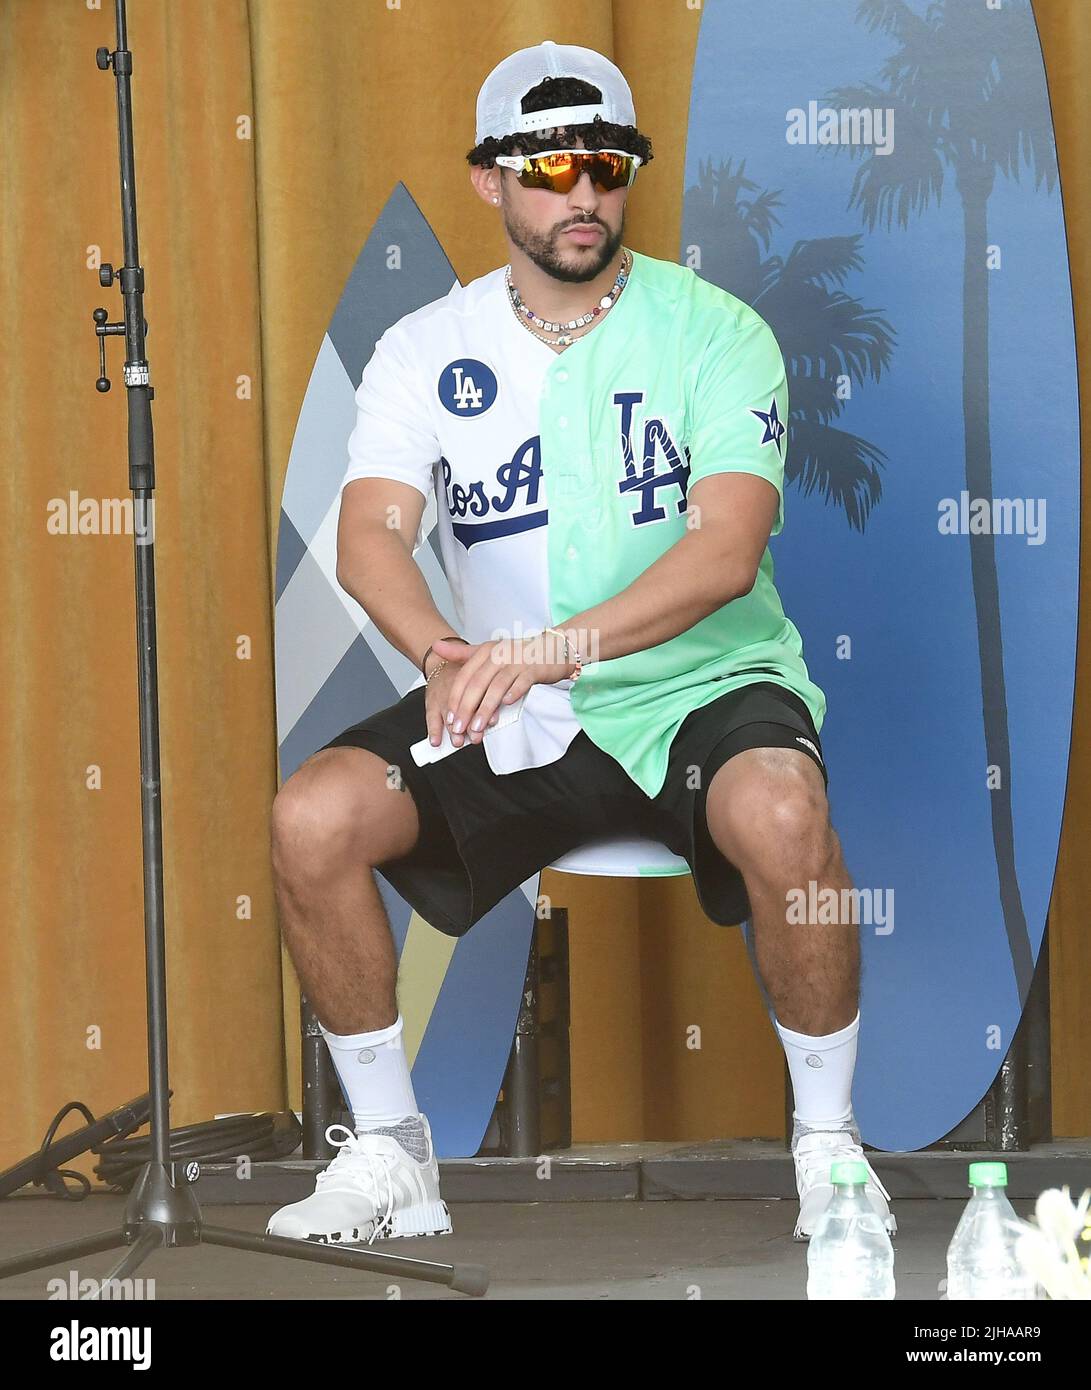 Bad Bunny Los Angeles All Star Jersey